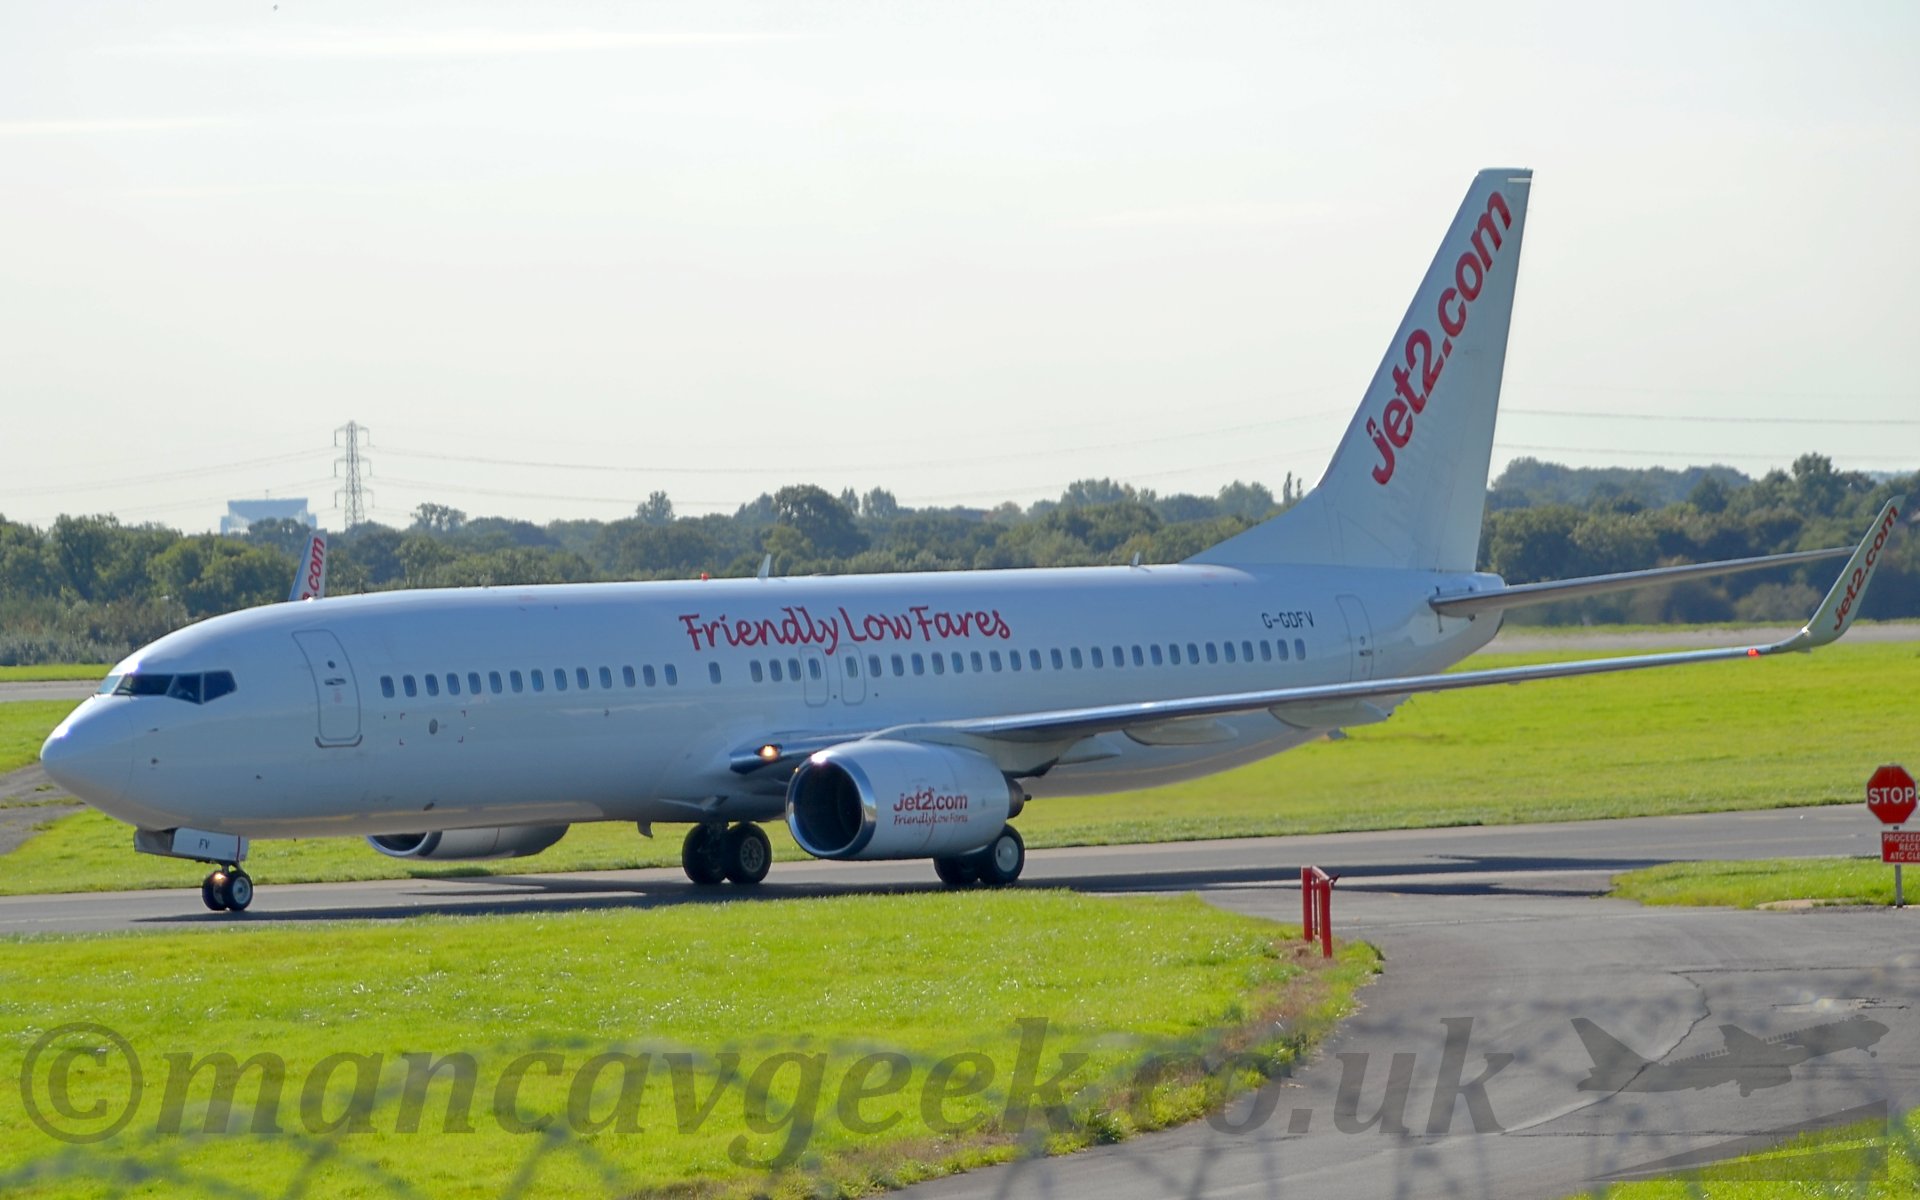 Side view of an all white twin engined jet airliner taxiing from right to left. There are red "Friendly Low Fares" titles in the upper fuselage over the wings, diagonal red "Jet2.com" titles on the tail and upturned wingtips, and both sets of titles on the engine pods. In the background, trees and bushes mark the airfield perimeter, running off into the distance. On the horizon, the dish of a radio telescope can be seen over the planes cockpit on the right of the frame. Above, the sky is a hazy bright white.